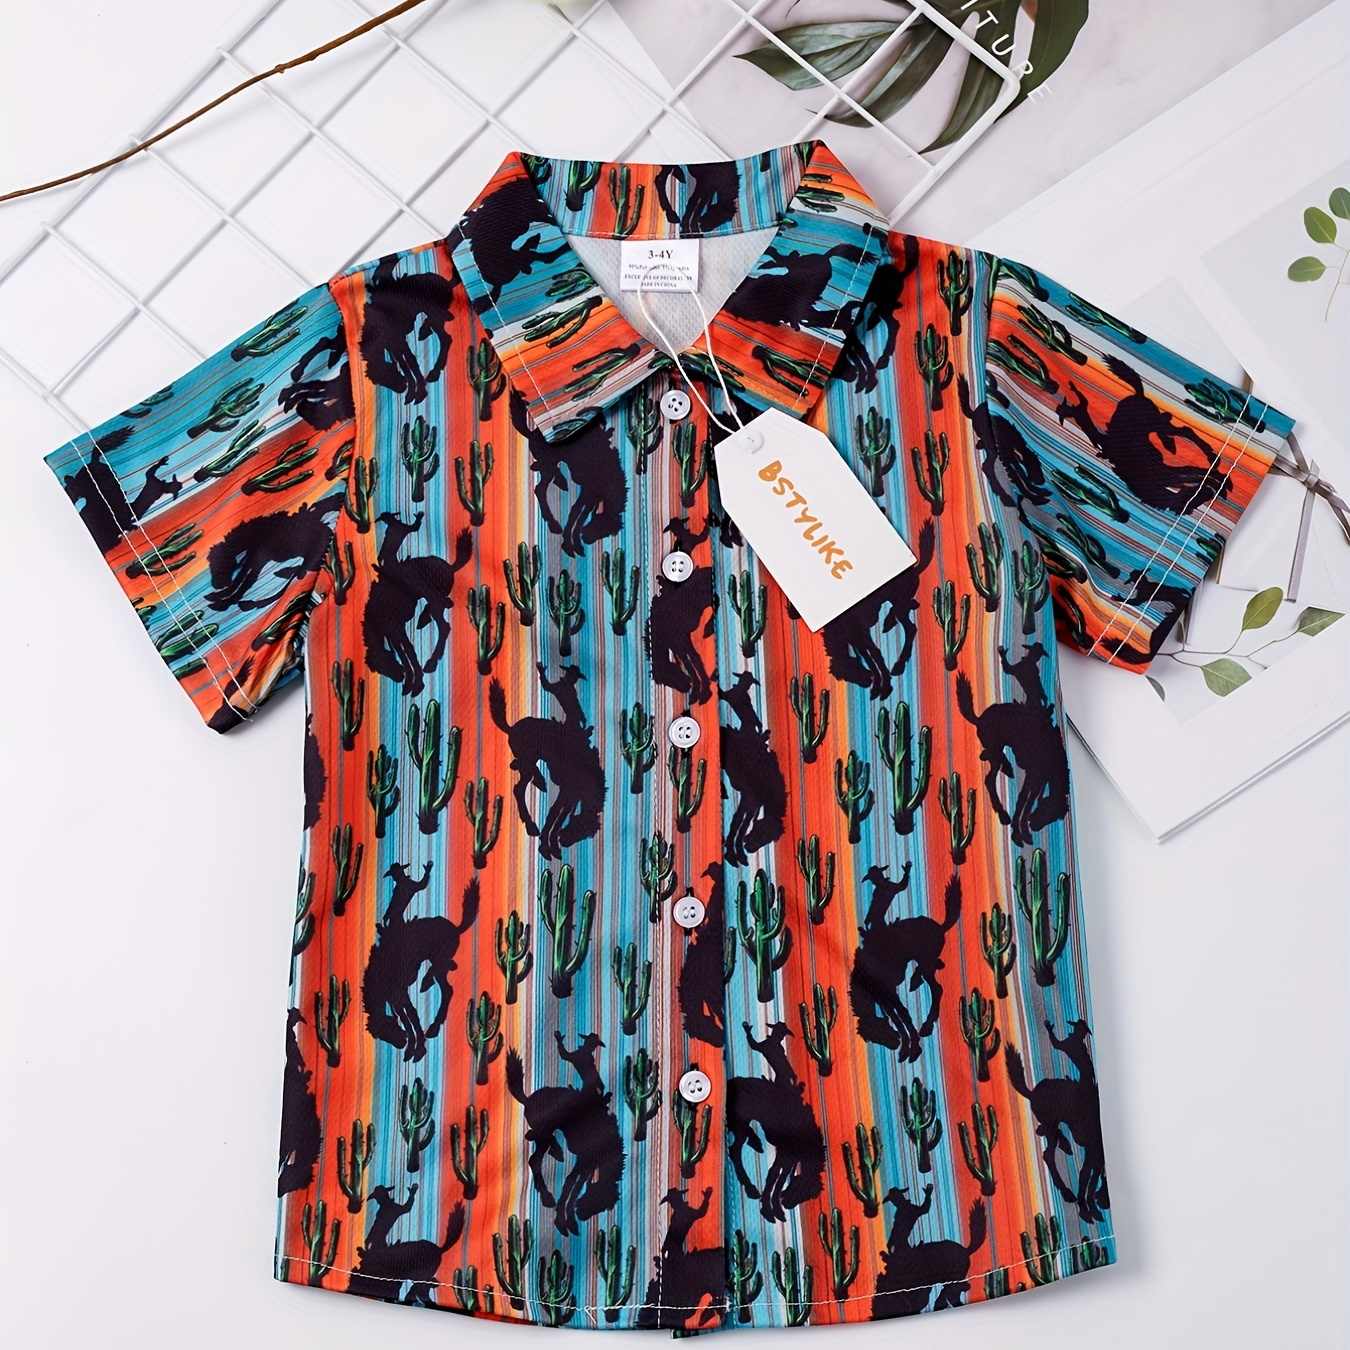 

Boys Bull And Cactus Striped Short Sleeves Button Down Shirt Tops Casual For Summer Kids Clothes